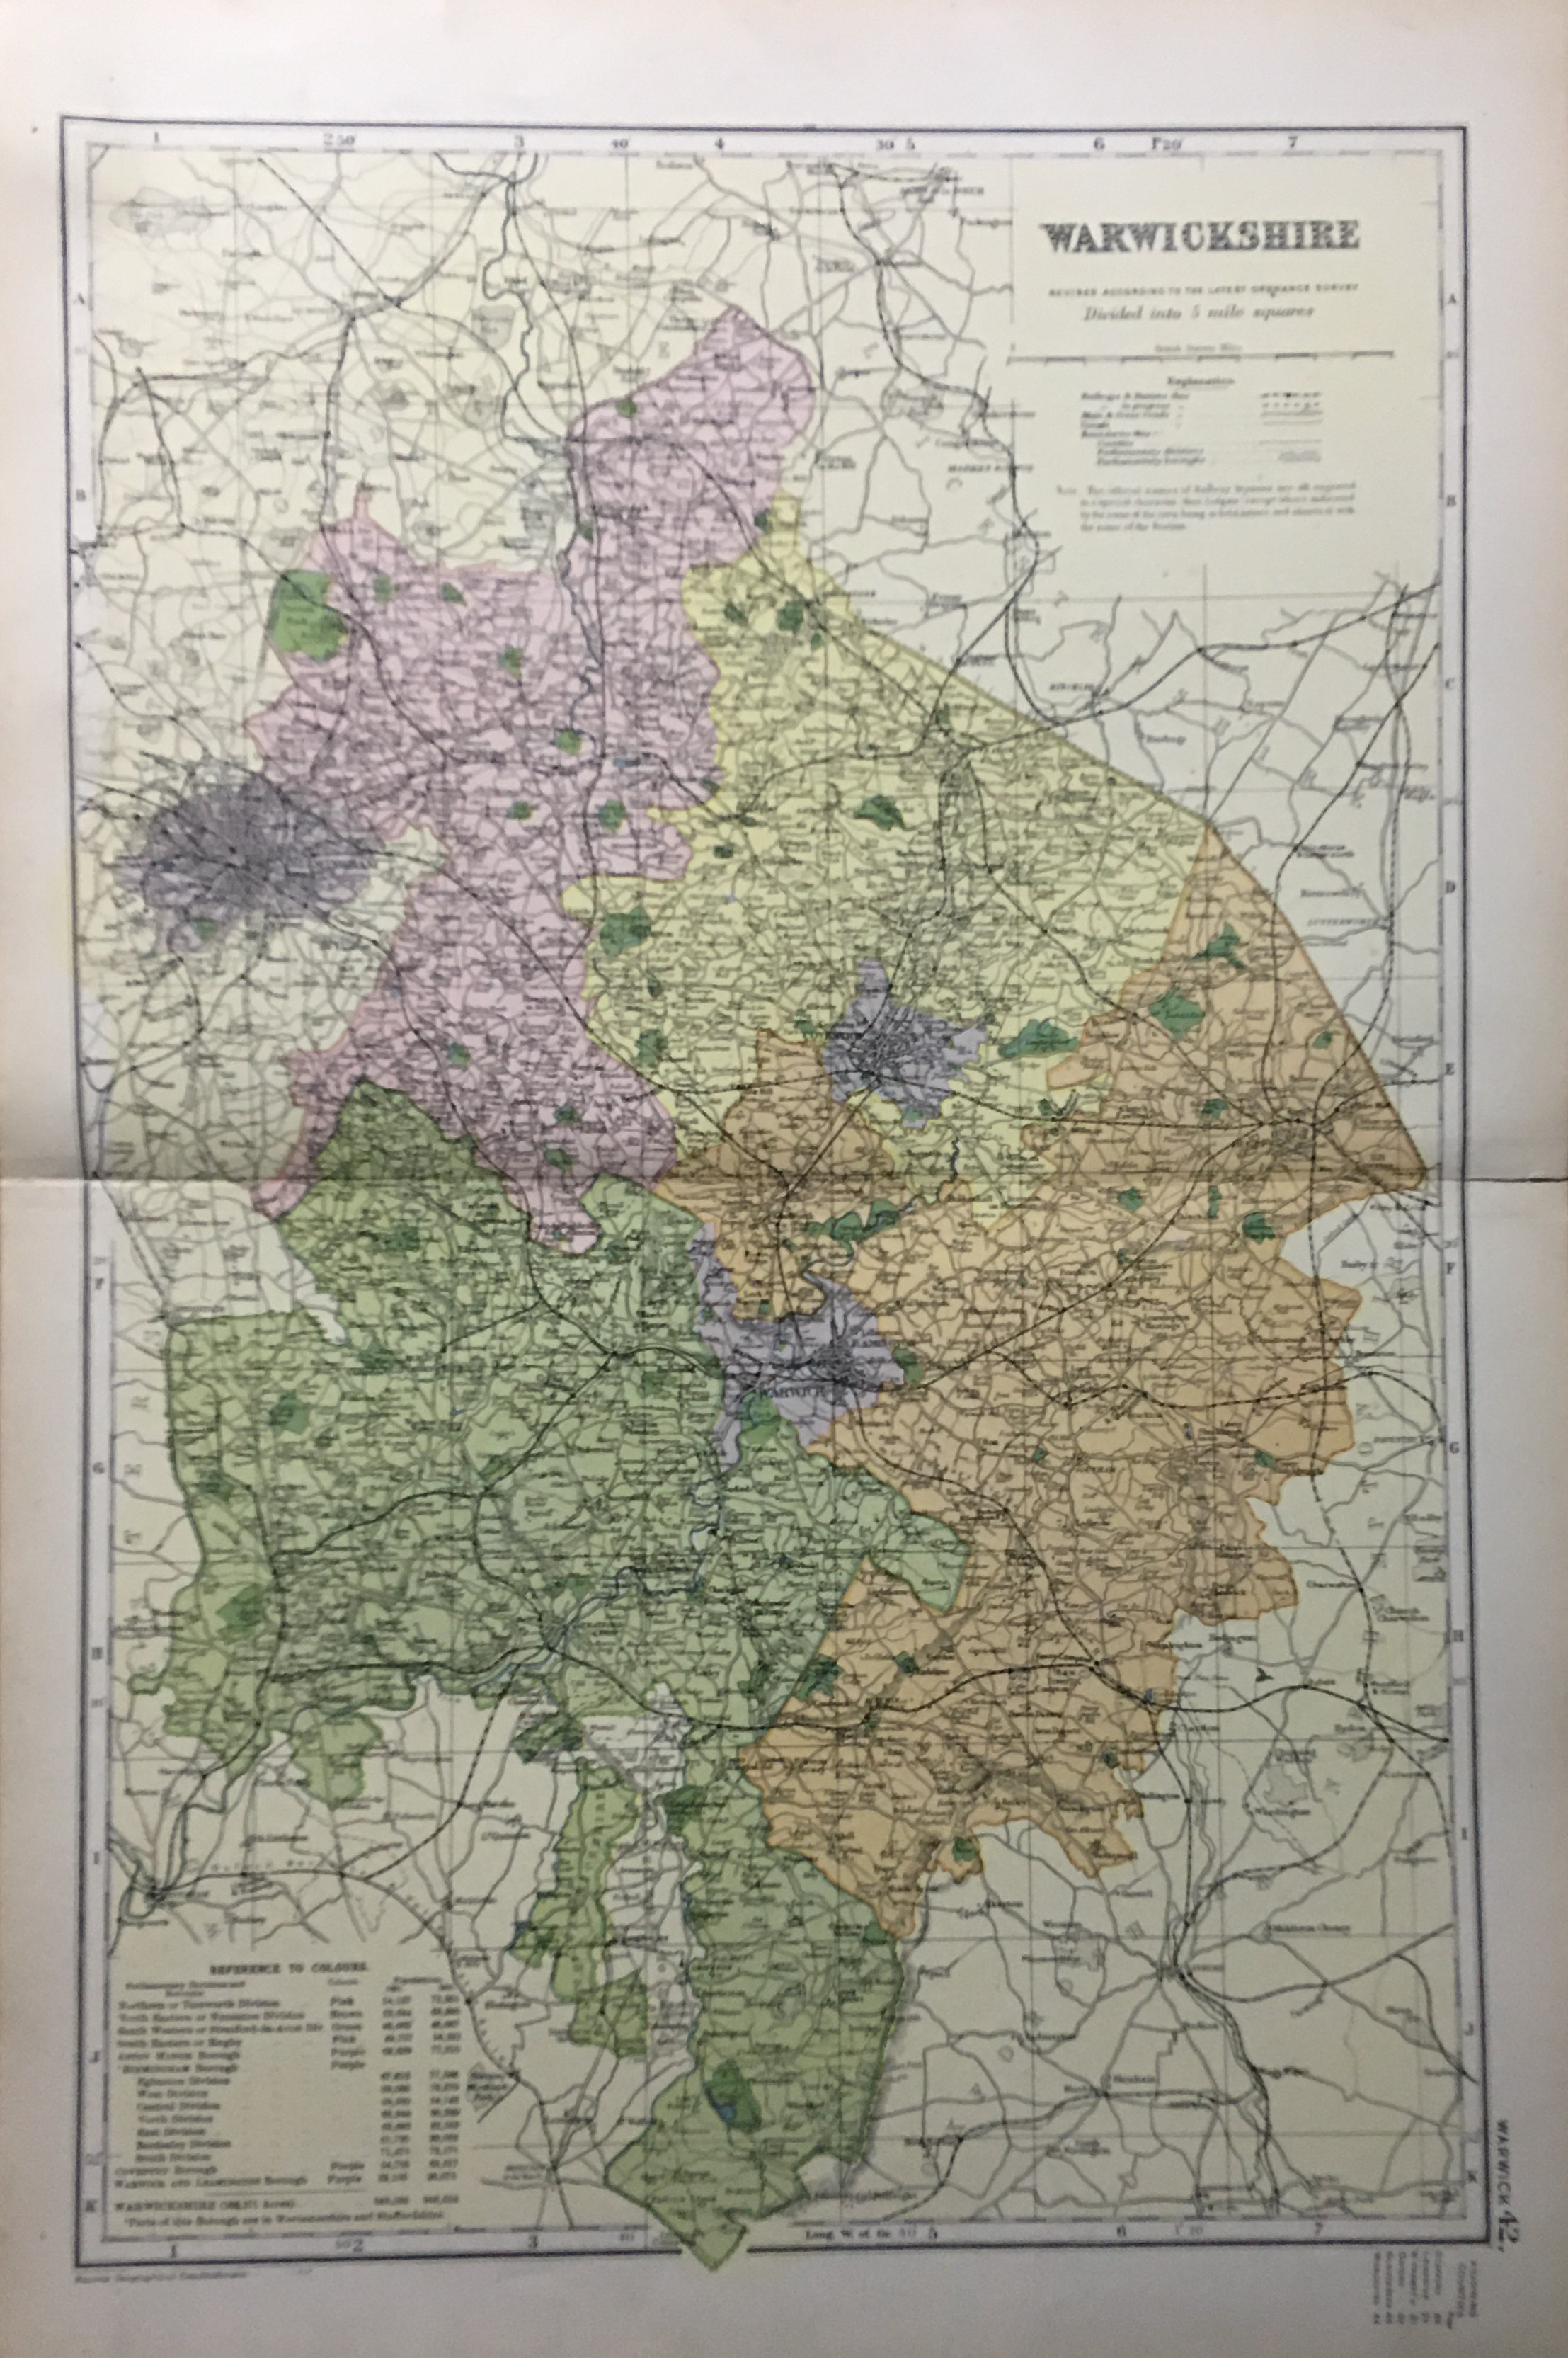 Coloured Antique Large Map Warwickshire GW Bacon 1904.